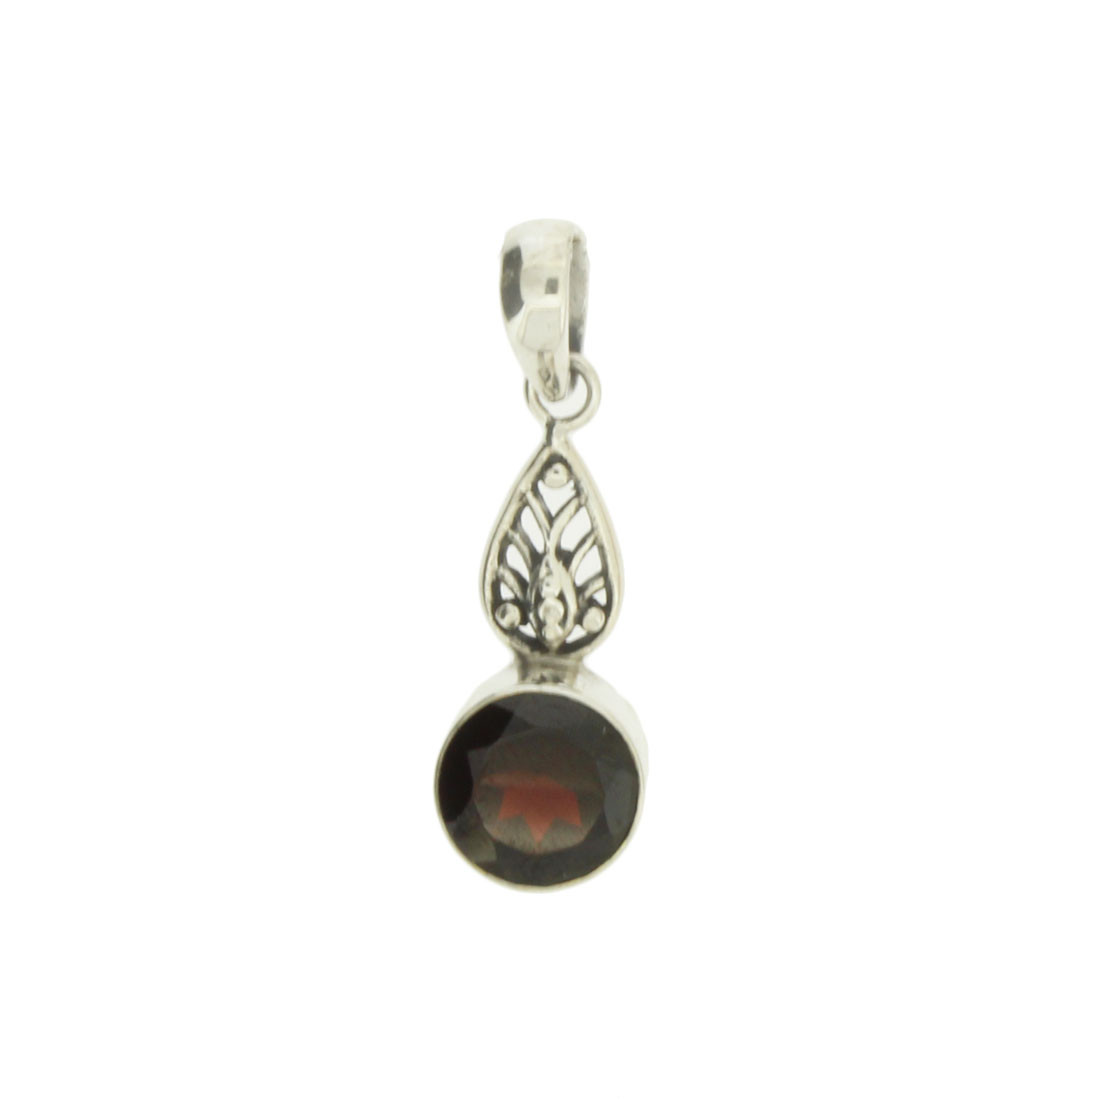 Faceted Round Red Garnet Pendant Sterling Silver Jewelry